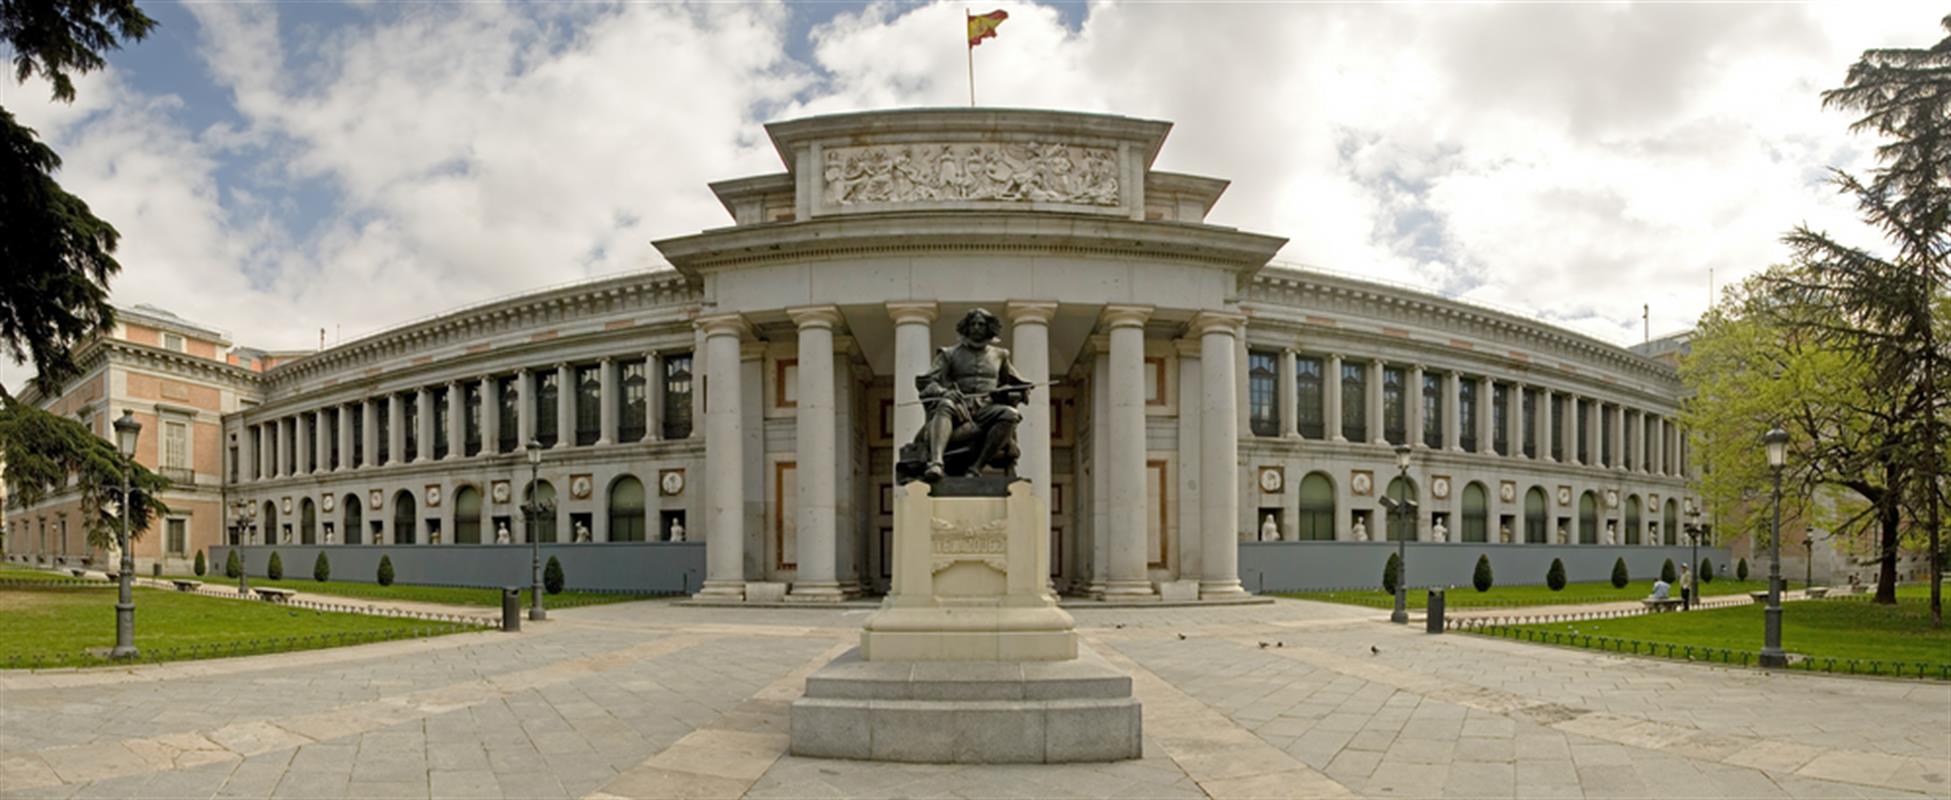 Museo del Prado,things to do in Madrid